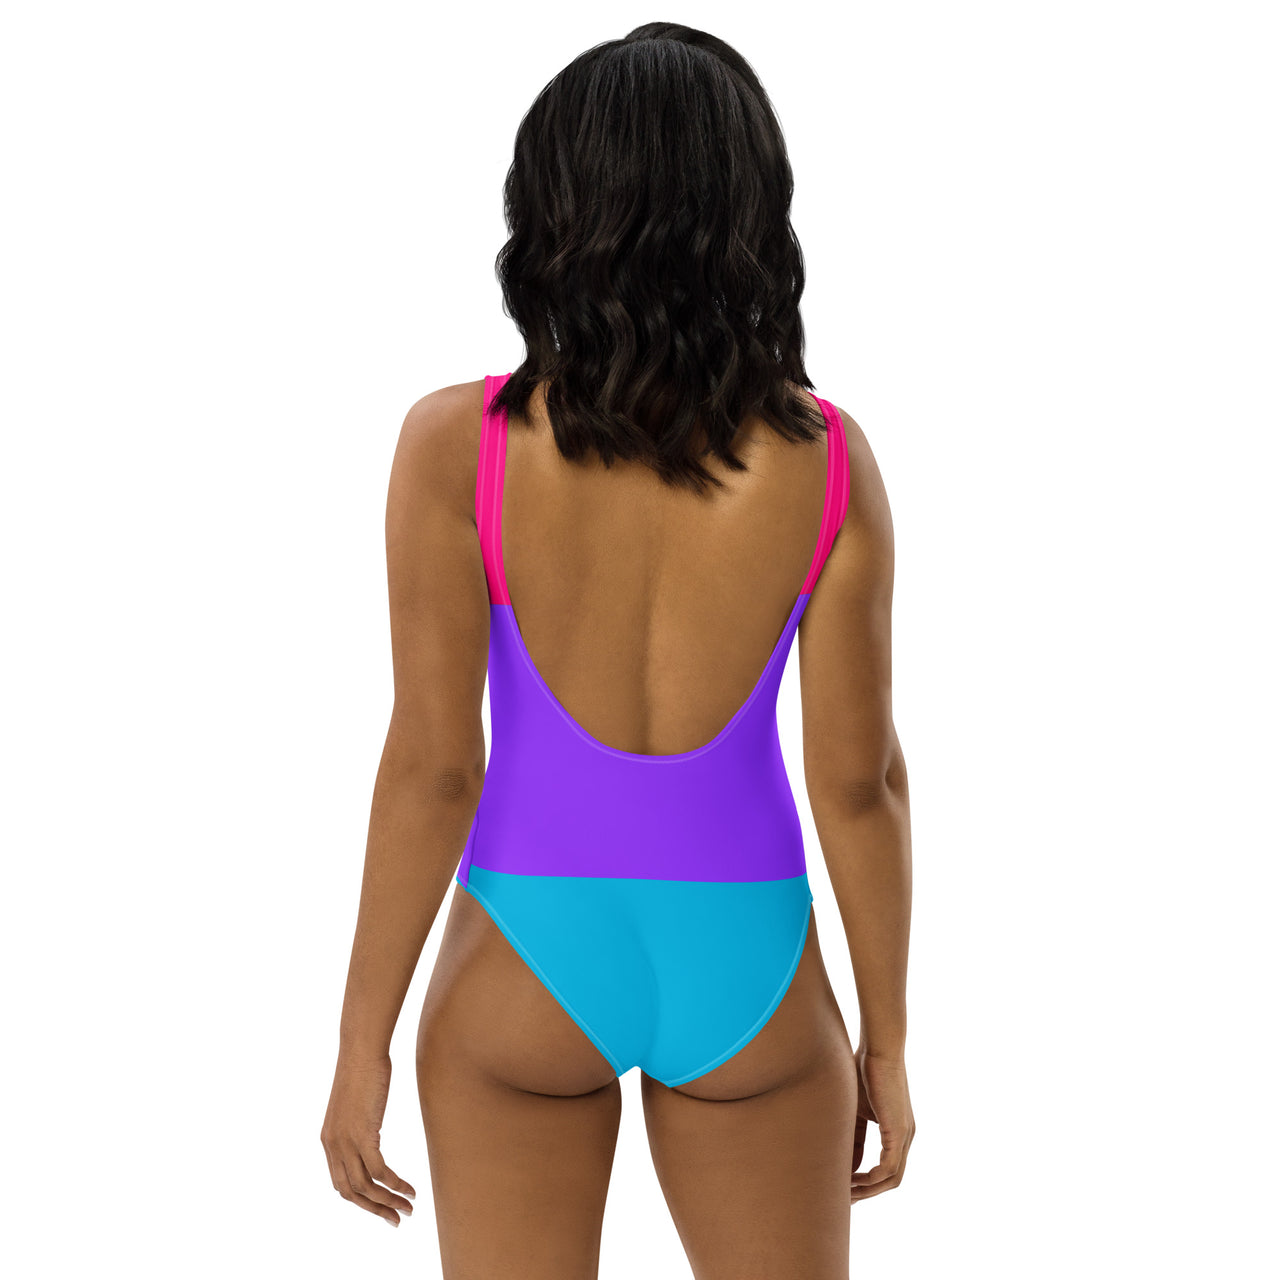 Androgyne Flag LGBTQ One-Piece Swimsuit Women’s Size SHAVA CO